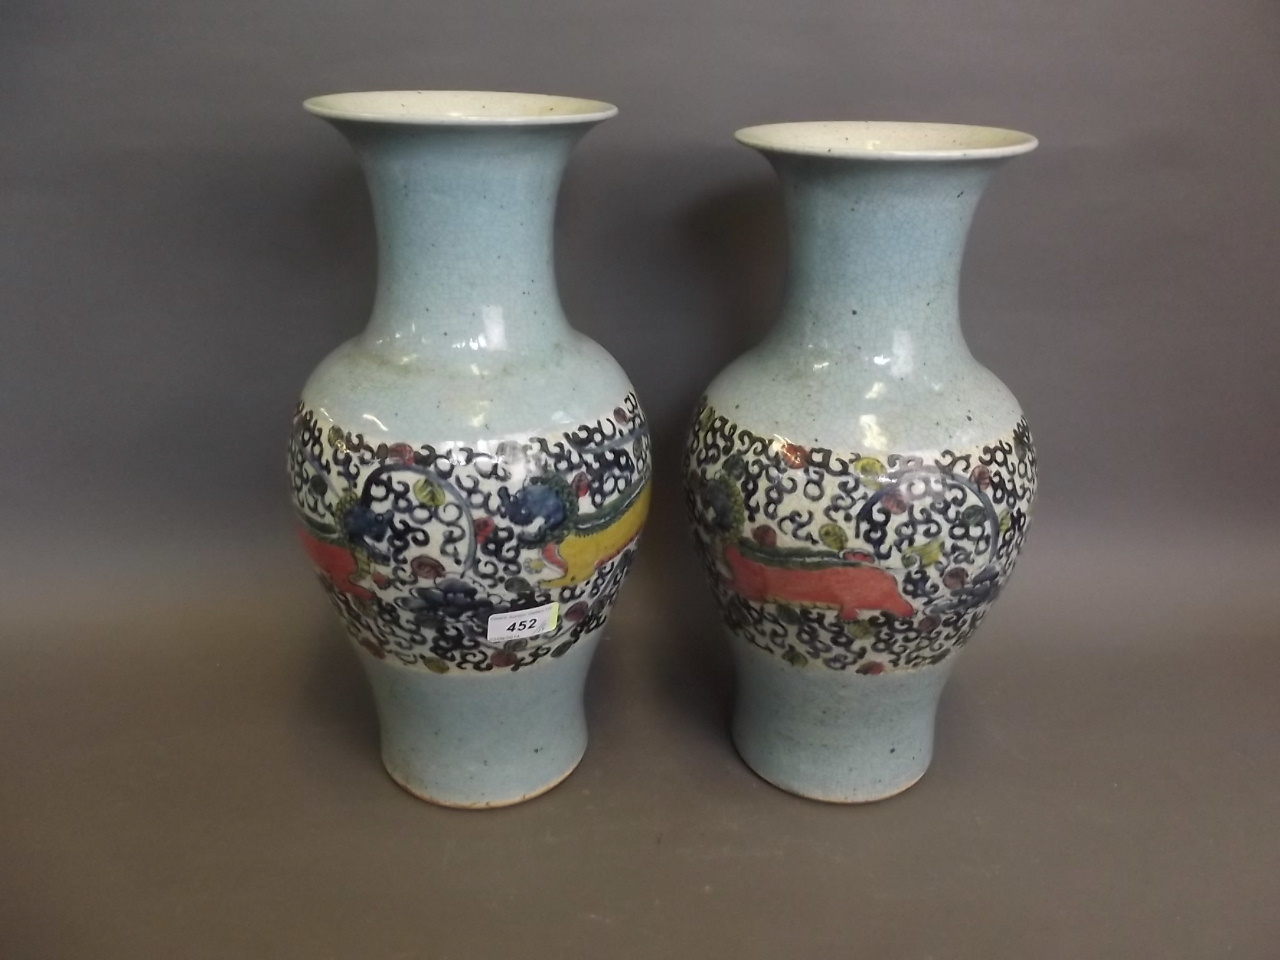 A pair of early C20th Chinese crackleware pottery vases painted with kylins on a pale blue ground,